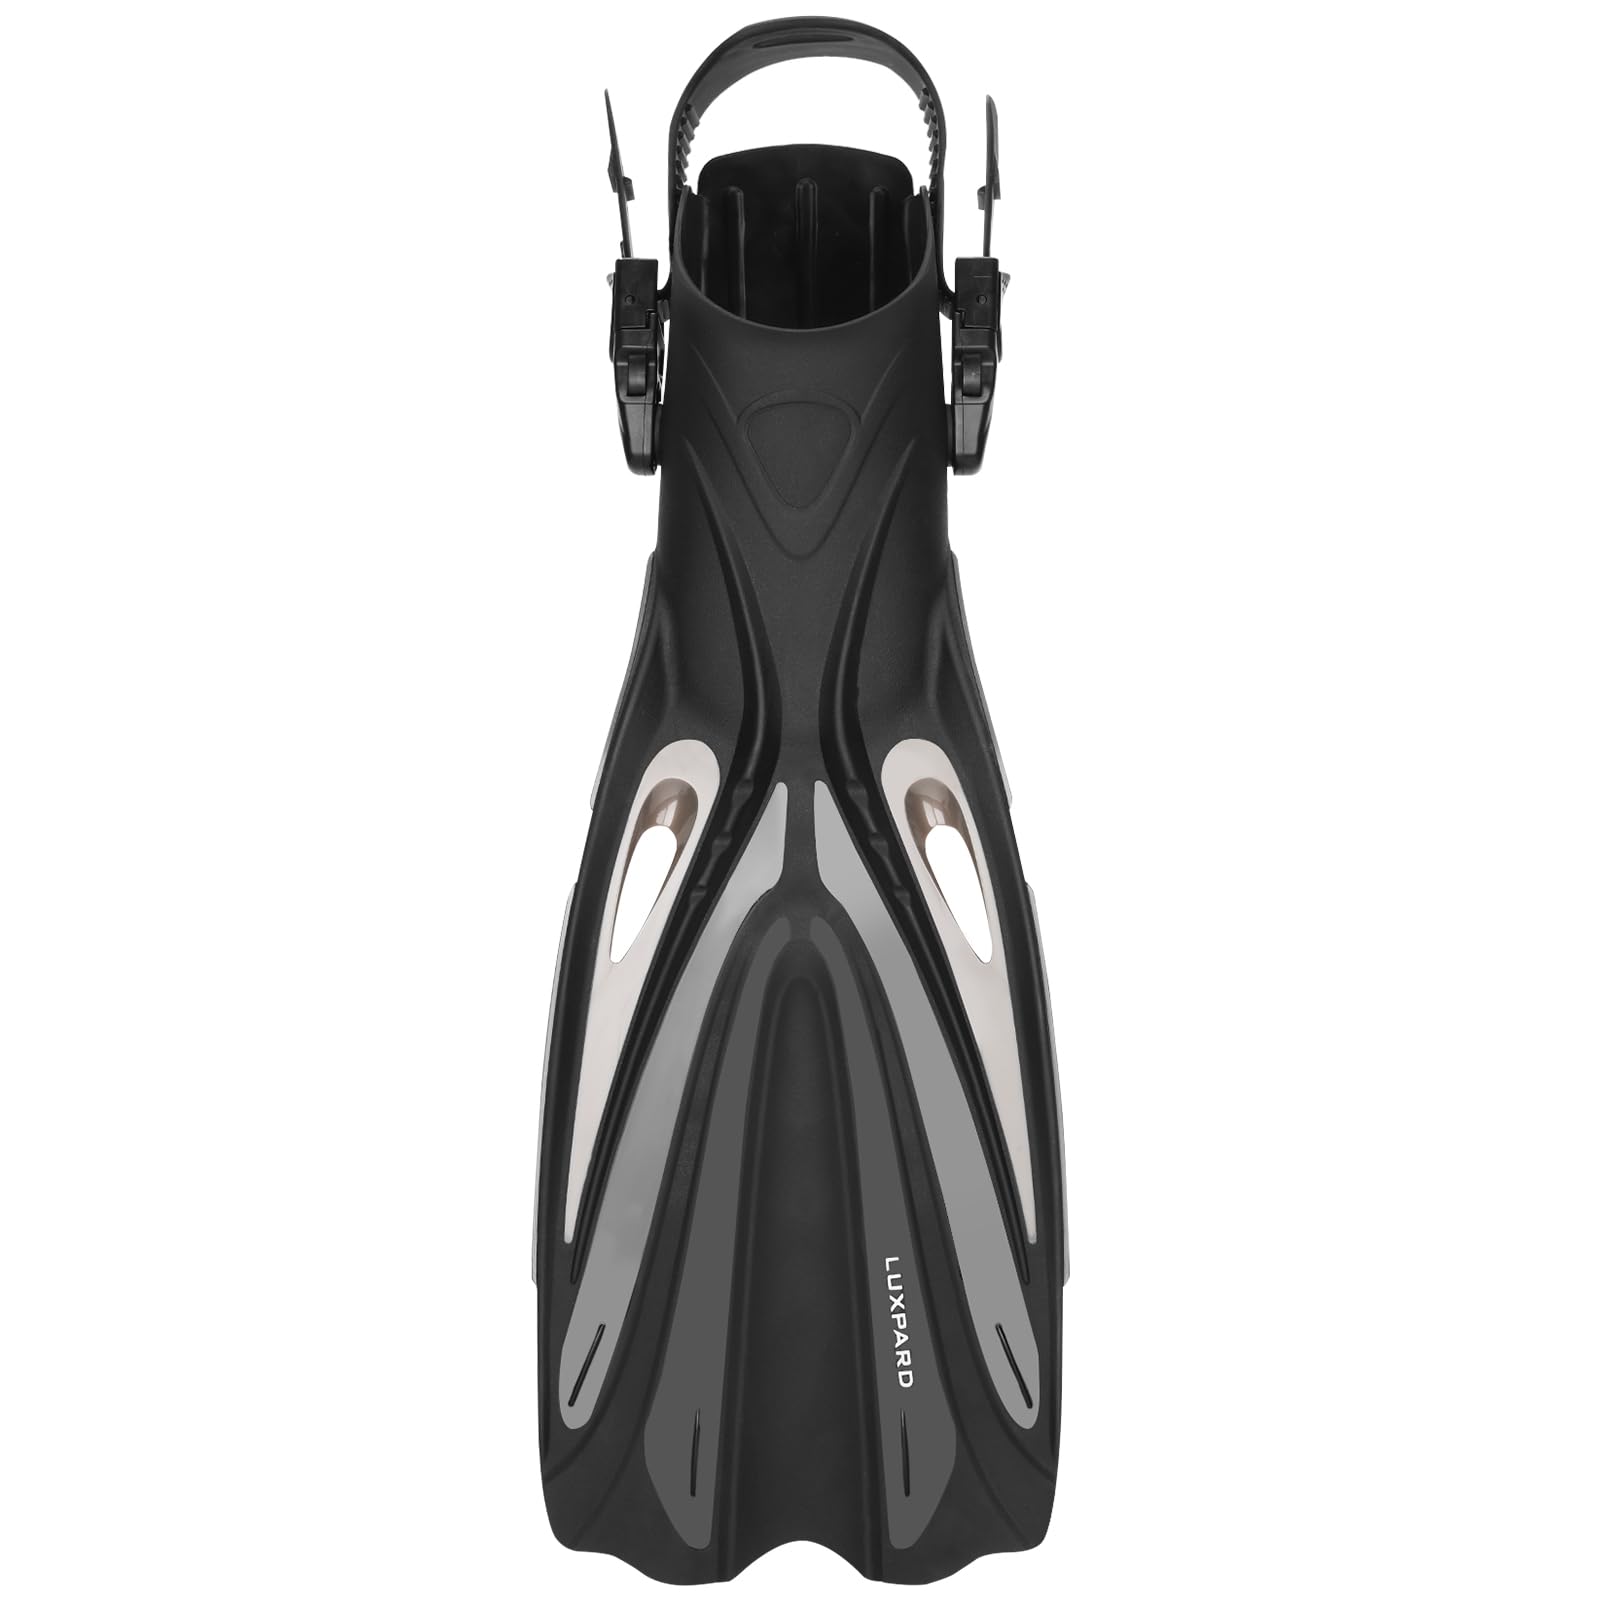 LUXPARD Diving Fins, Powerful Efficient Open Heel Scuba Diving Fins, Flippers for Snorkeling and Freediving with Adjustable Buckles